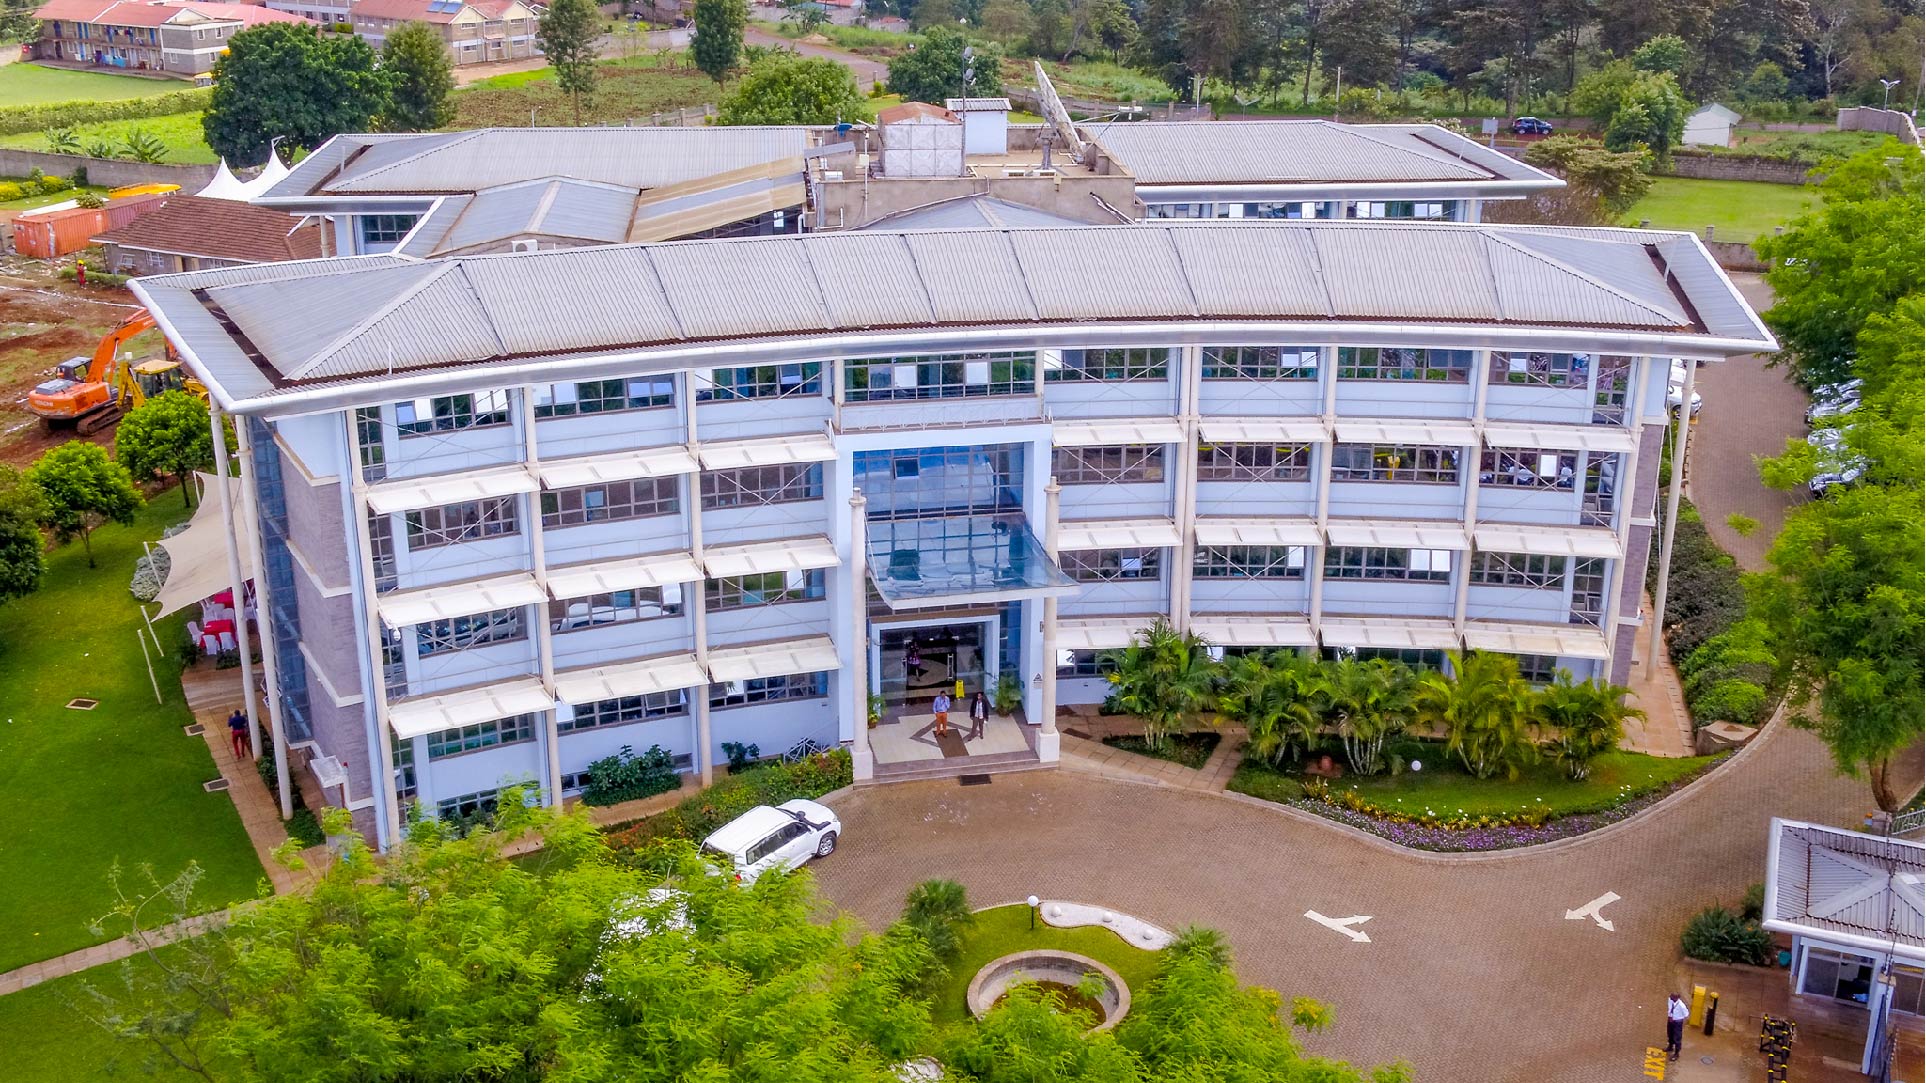 APHRC Launched its Campus in Kitisuru, Nairobi